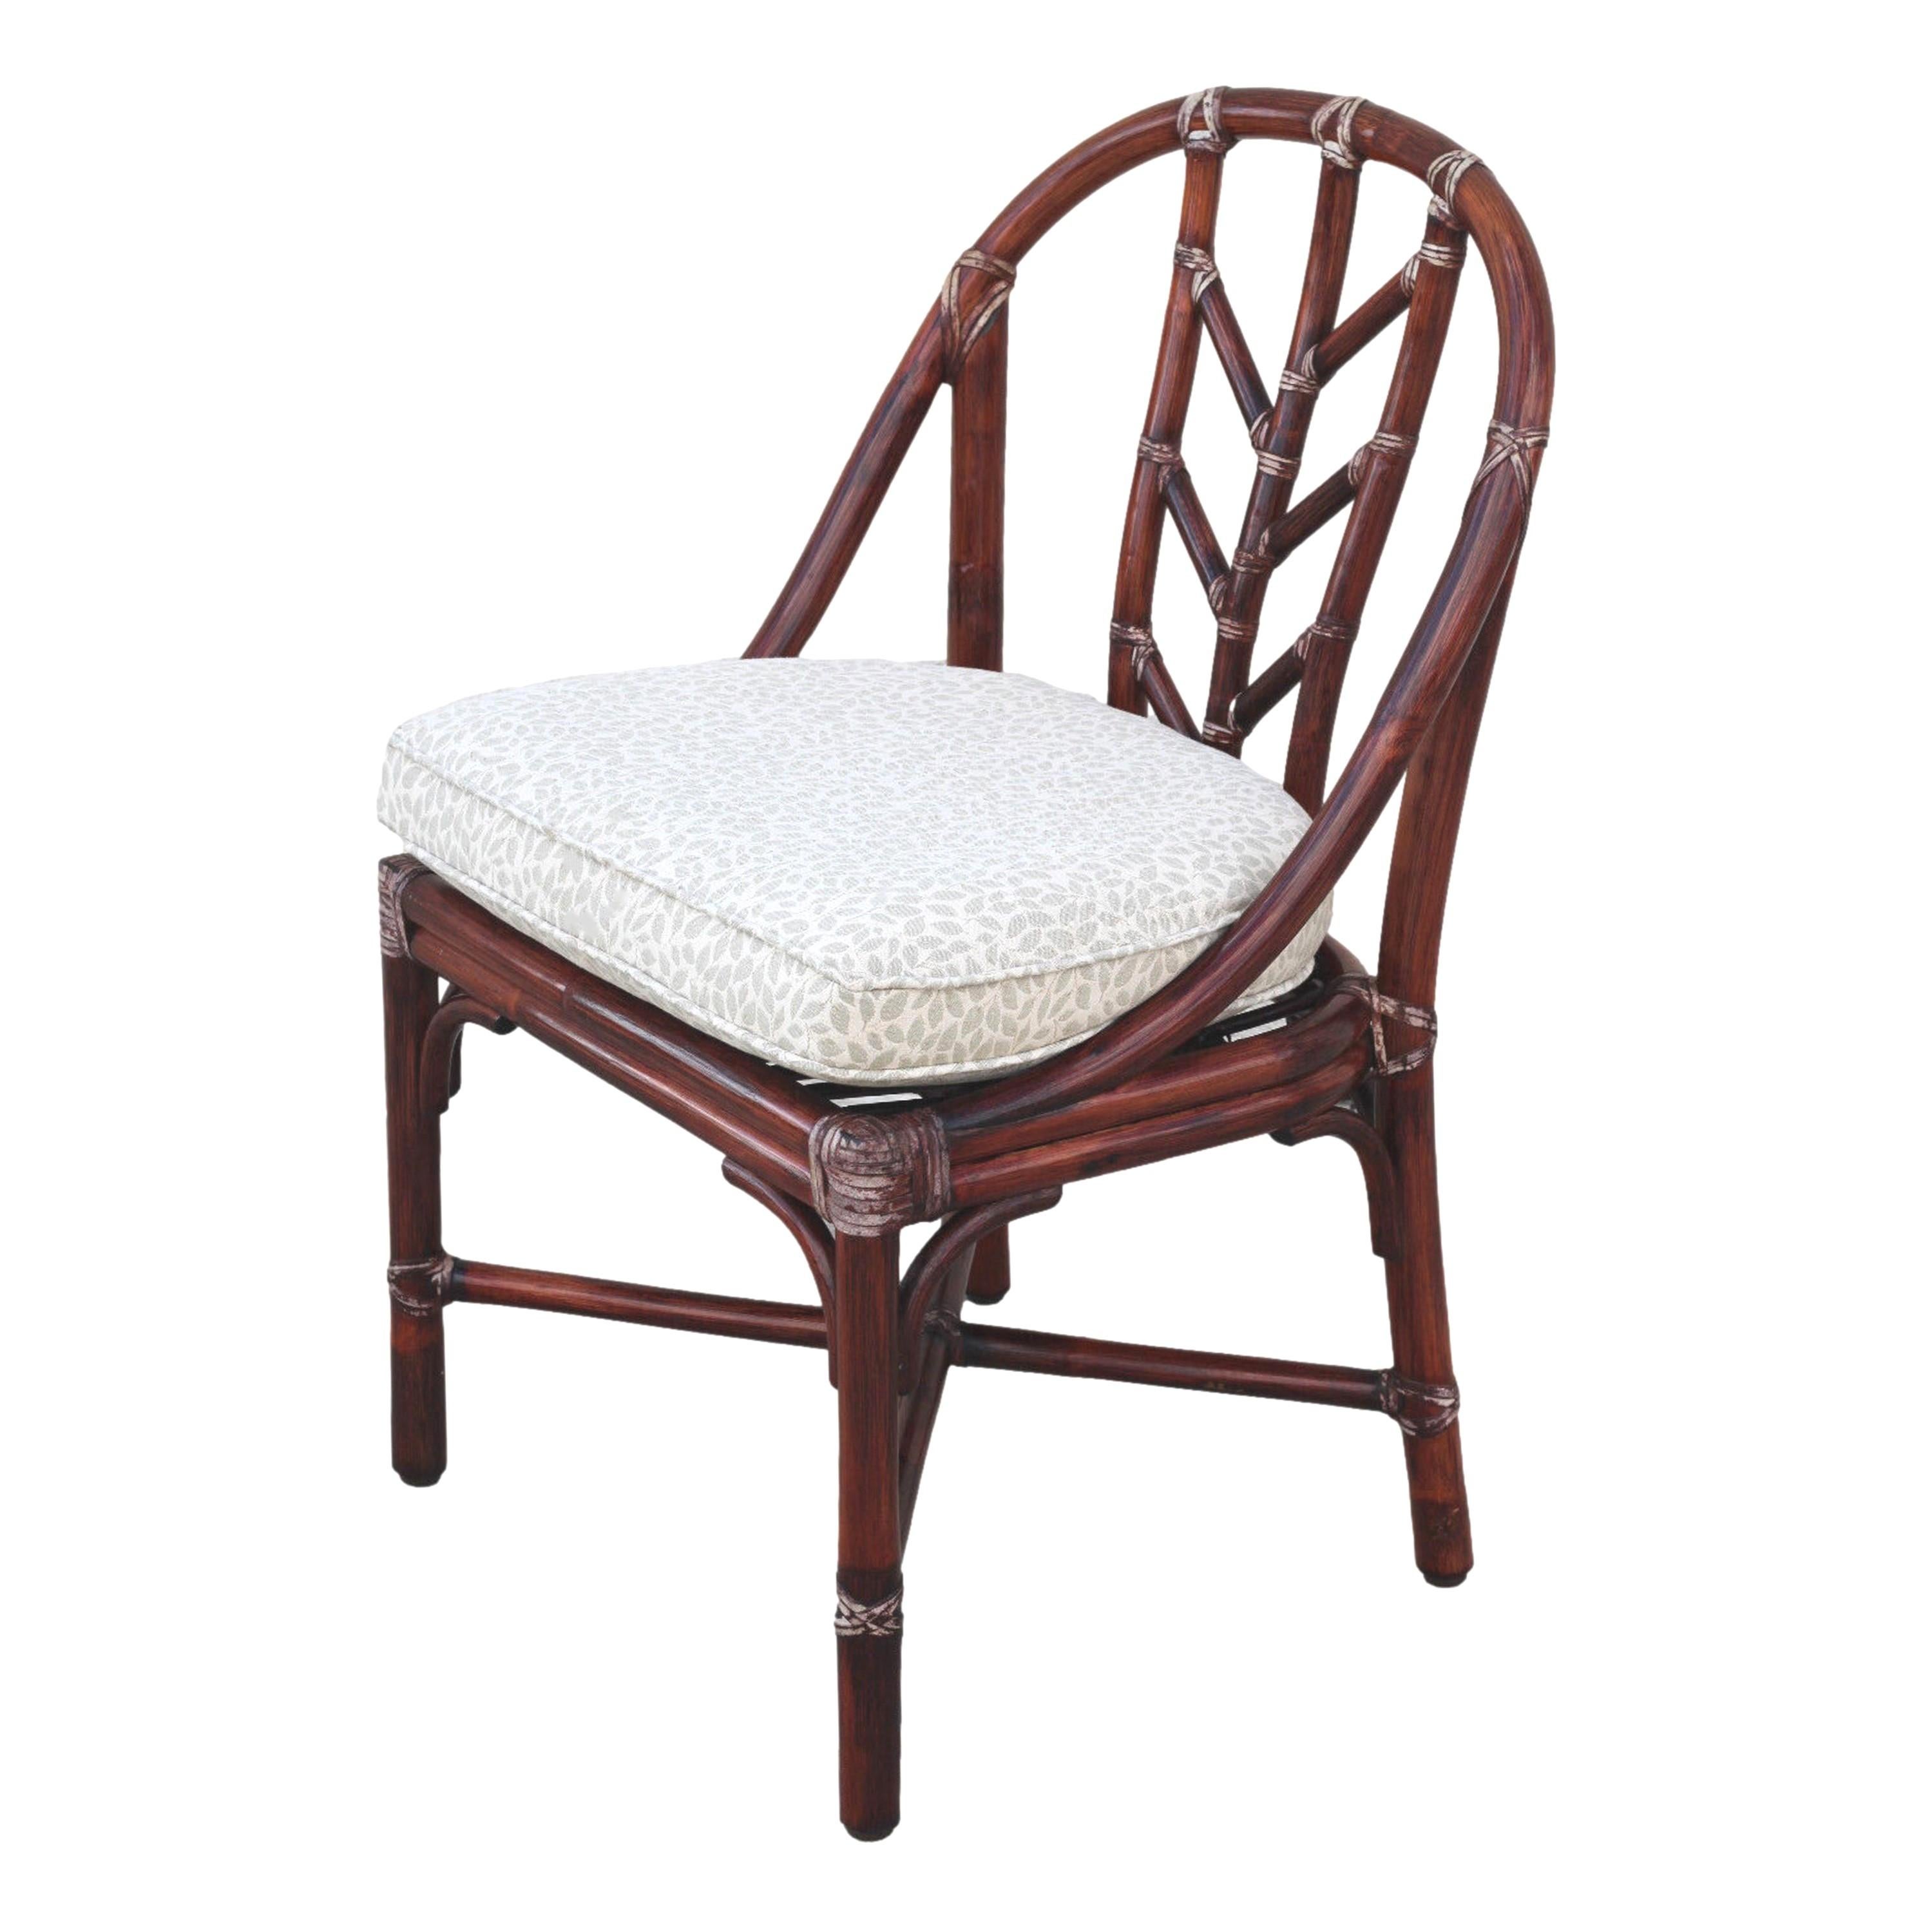 American Elinor McGuire for McGuire San Francisco Rattan Dining Chairs, a Pair For Sale